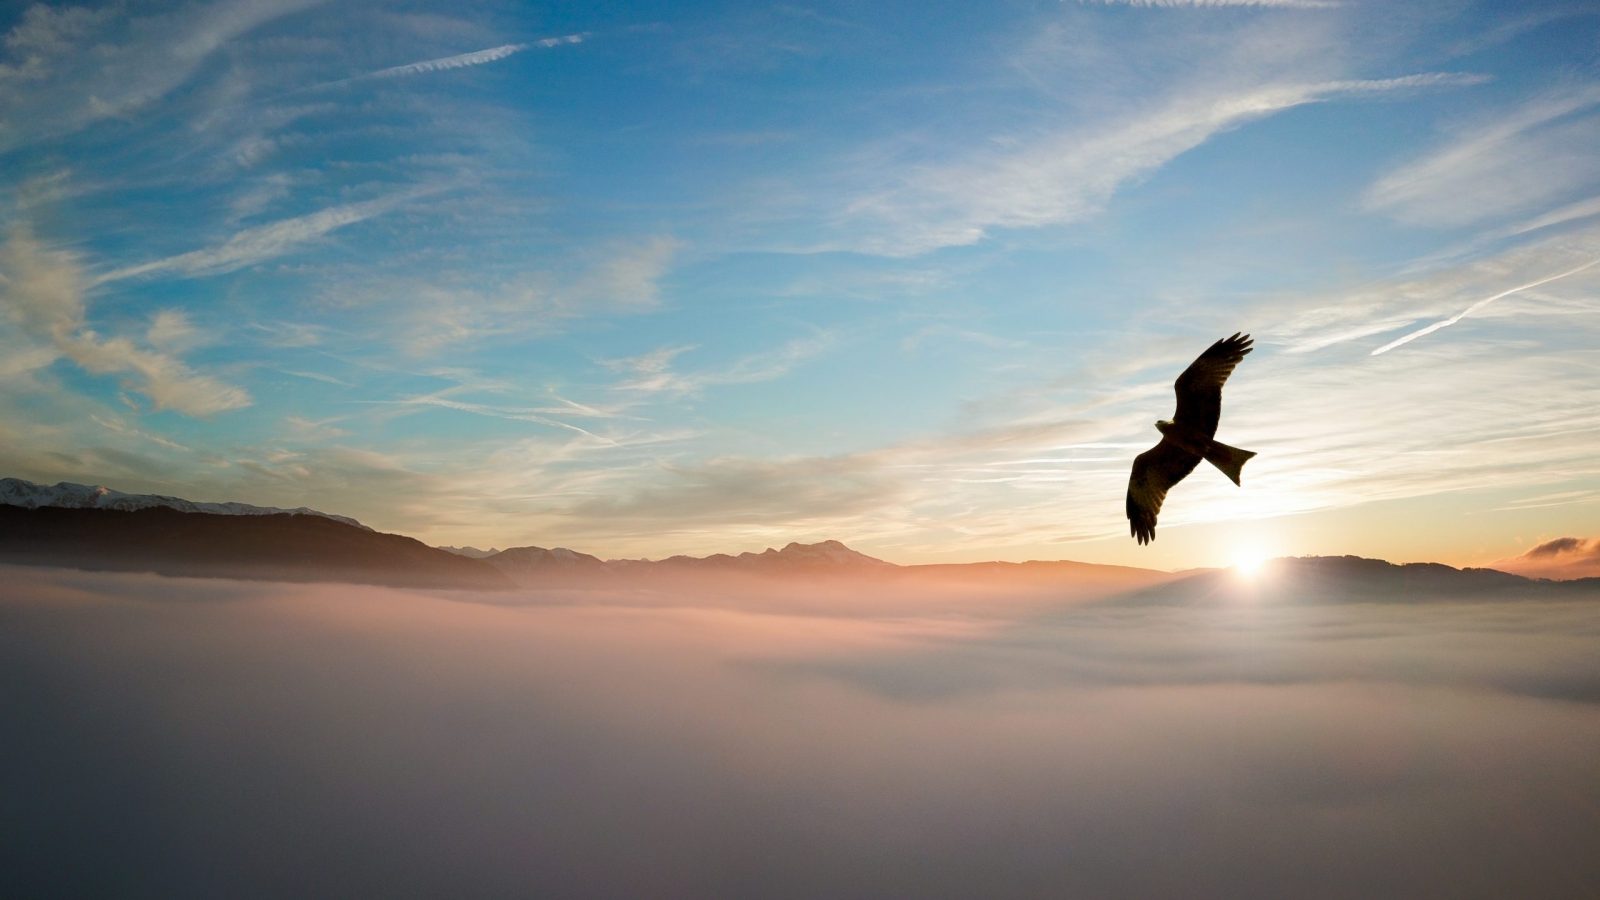 an image of an eagle soarin above the clouds